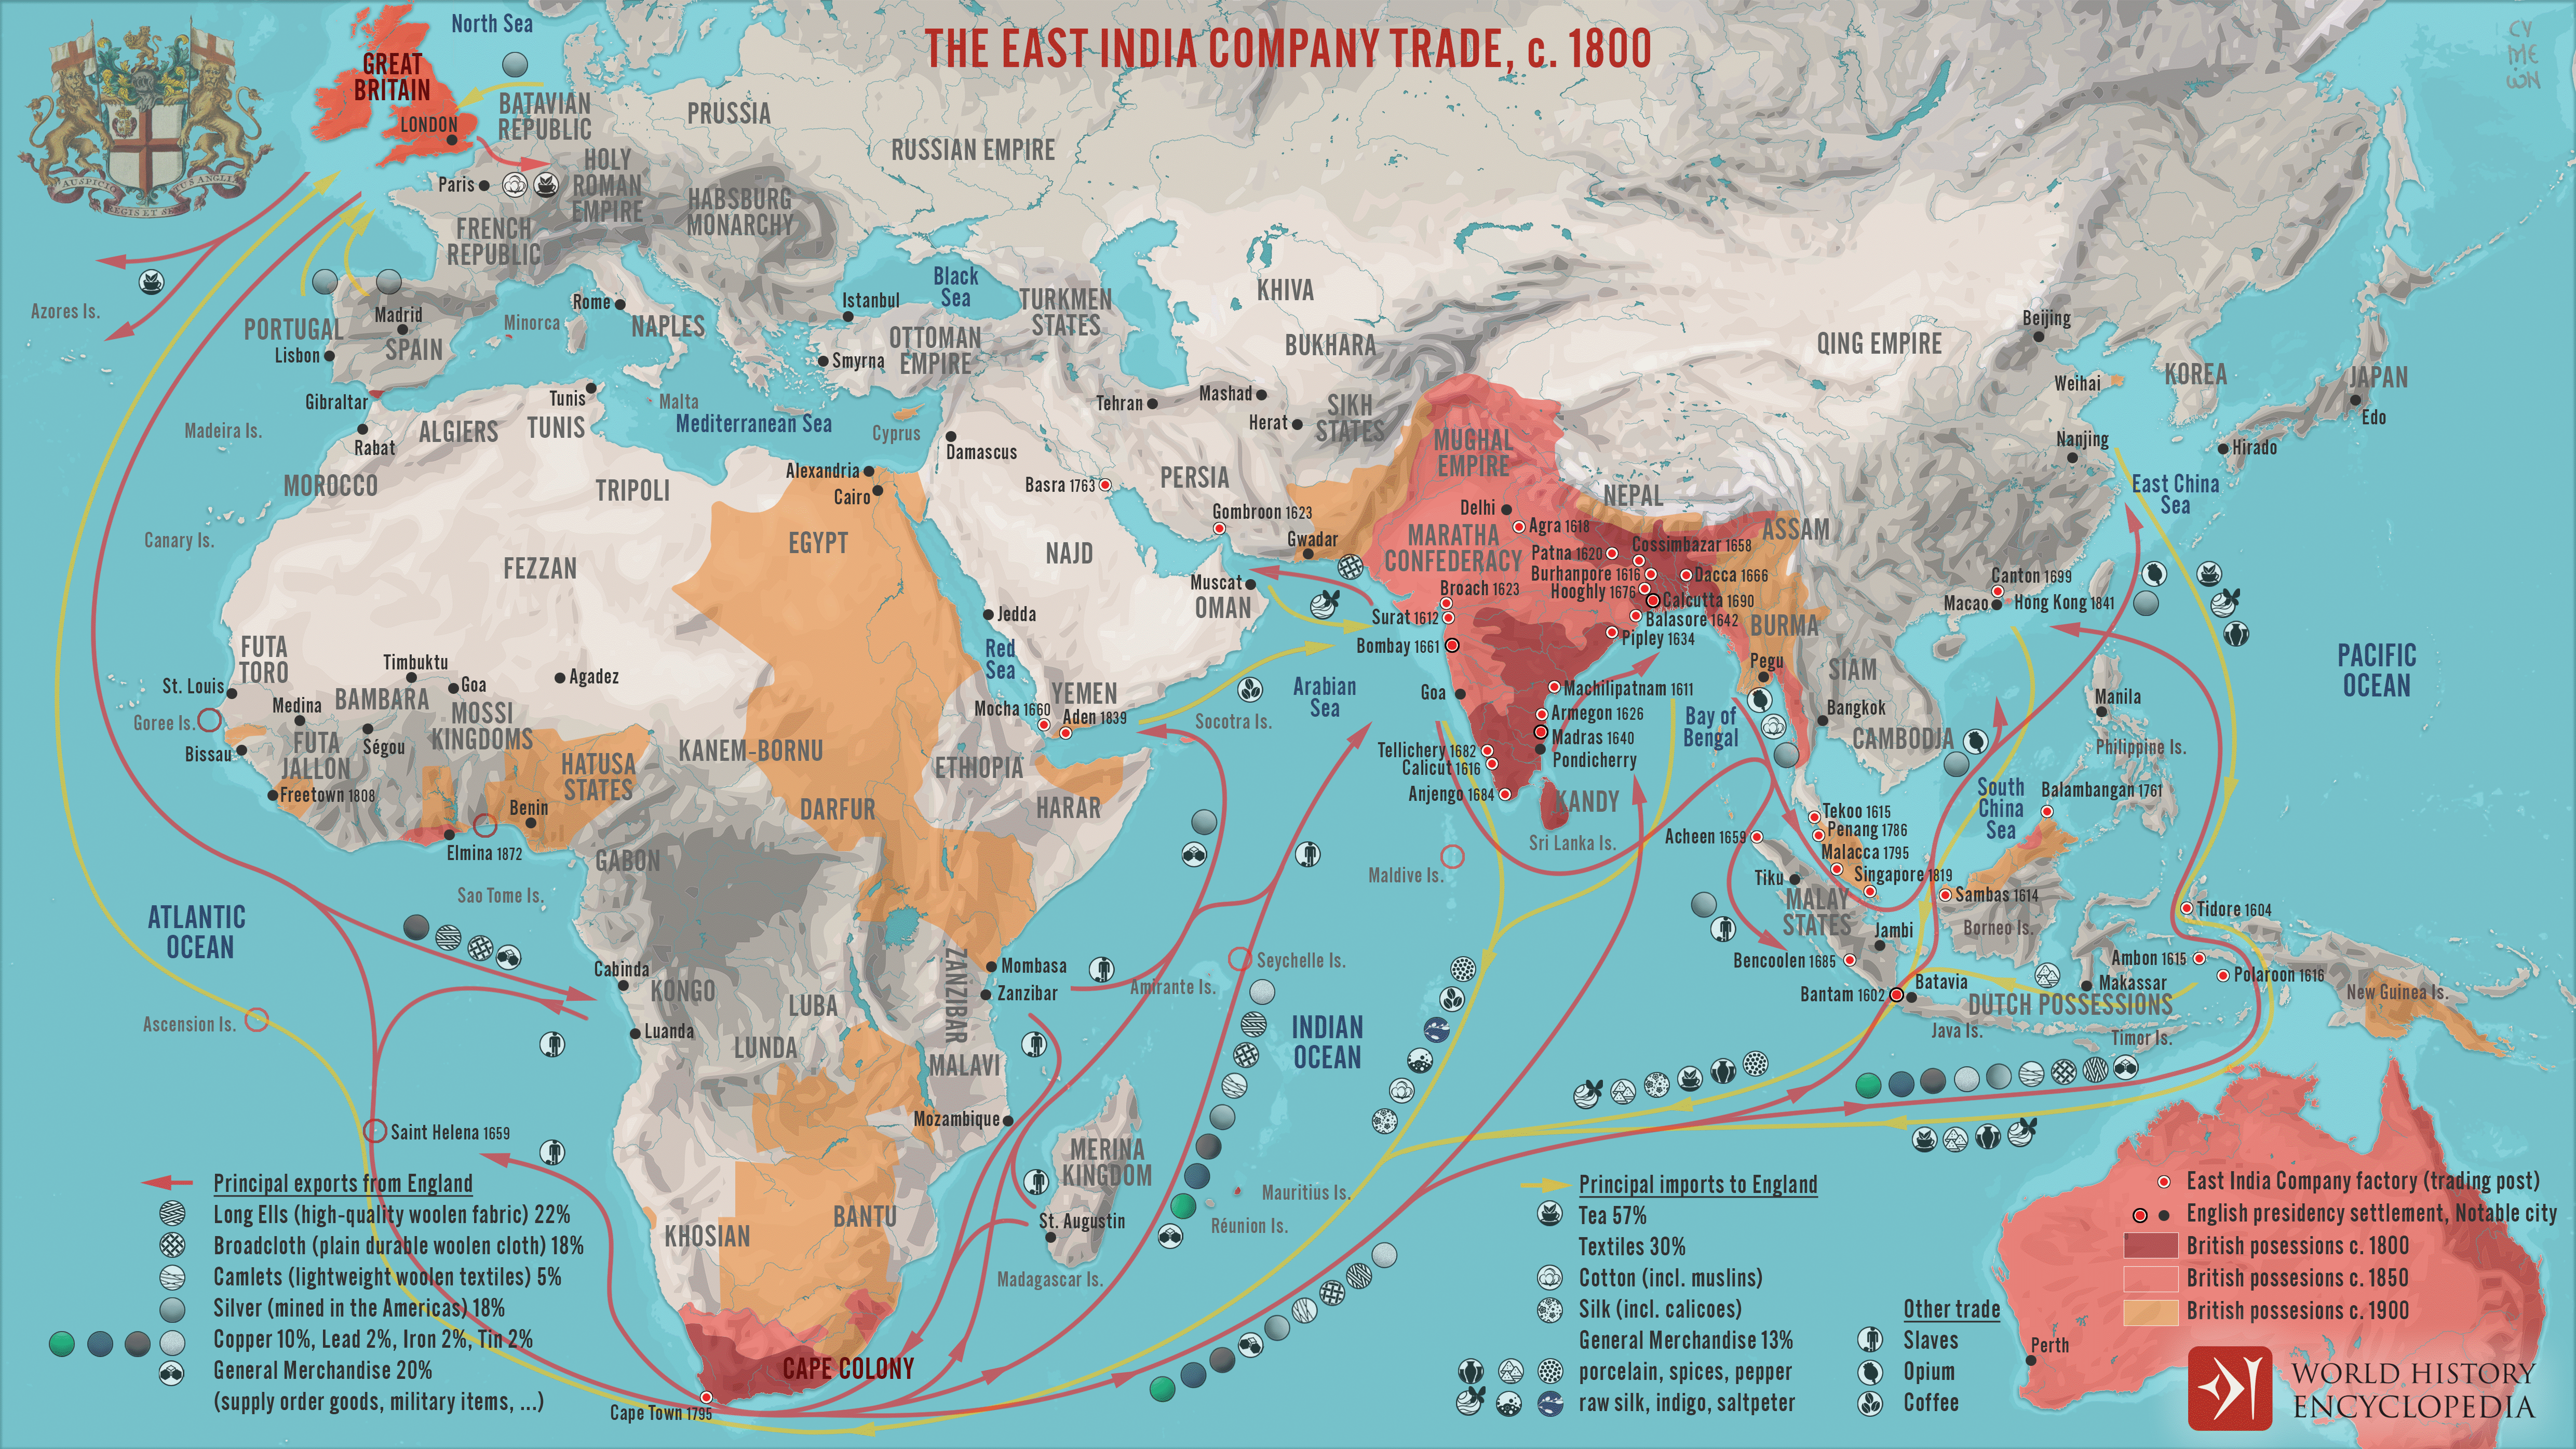 the East India Company (EIC)'s networks in East and Southeast Asia and India around 1800 